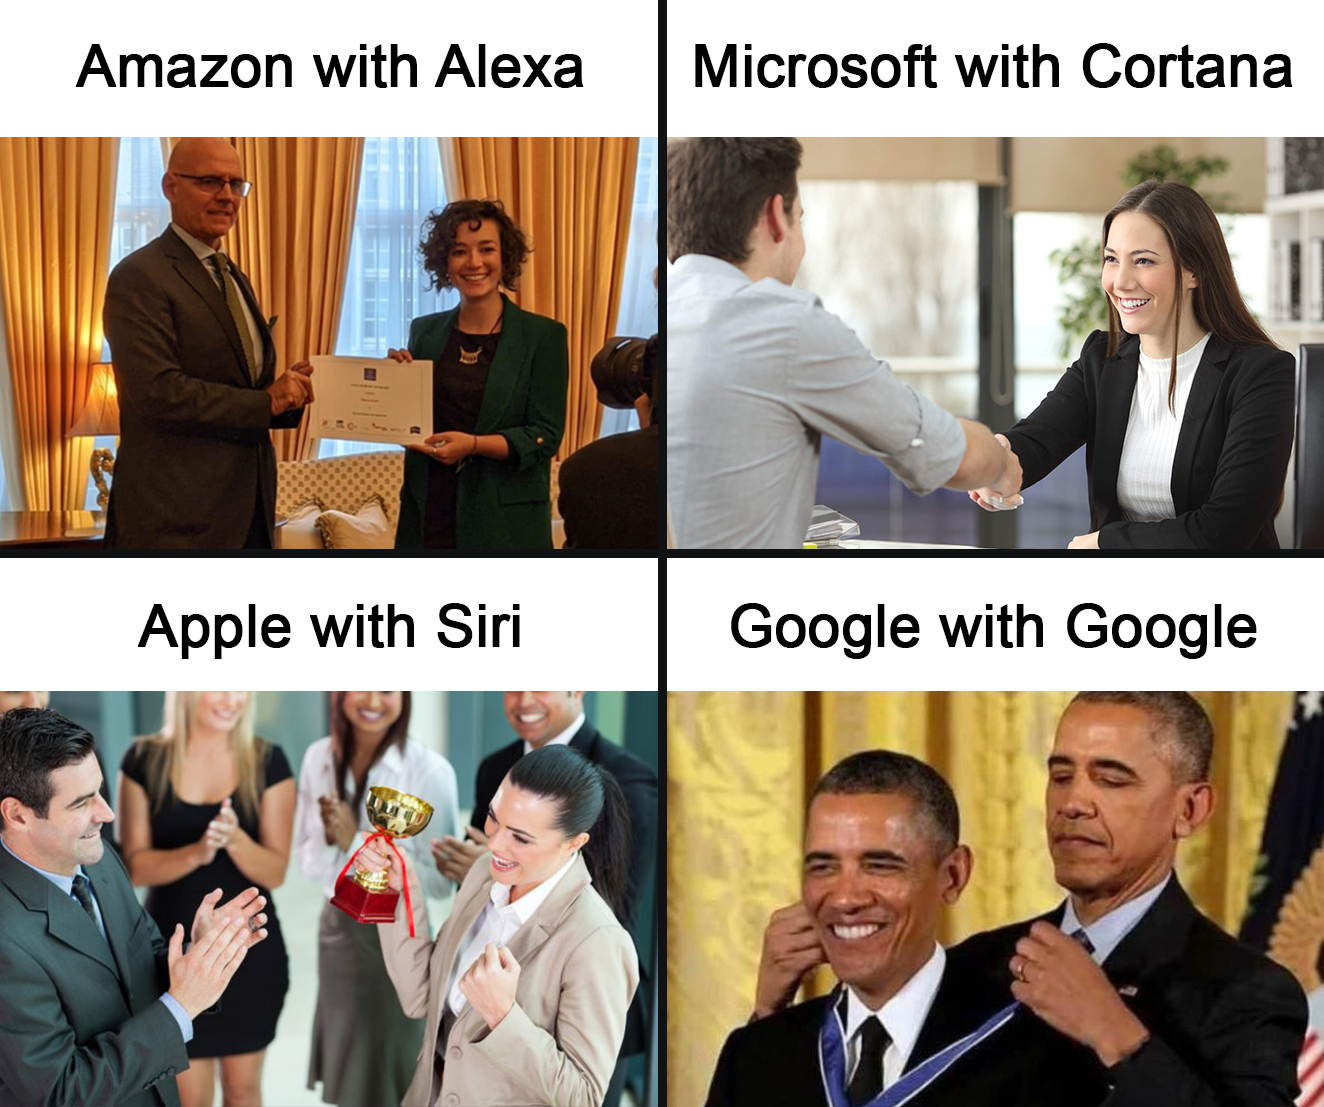 fresh memes - people who laugh at their own jokes - Amazon with Alexa Microsoft with Cortana Apple with Siri Google with Google